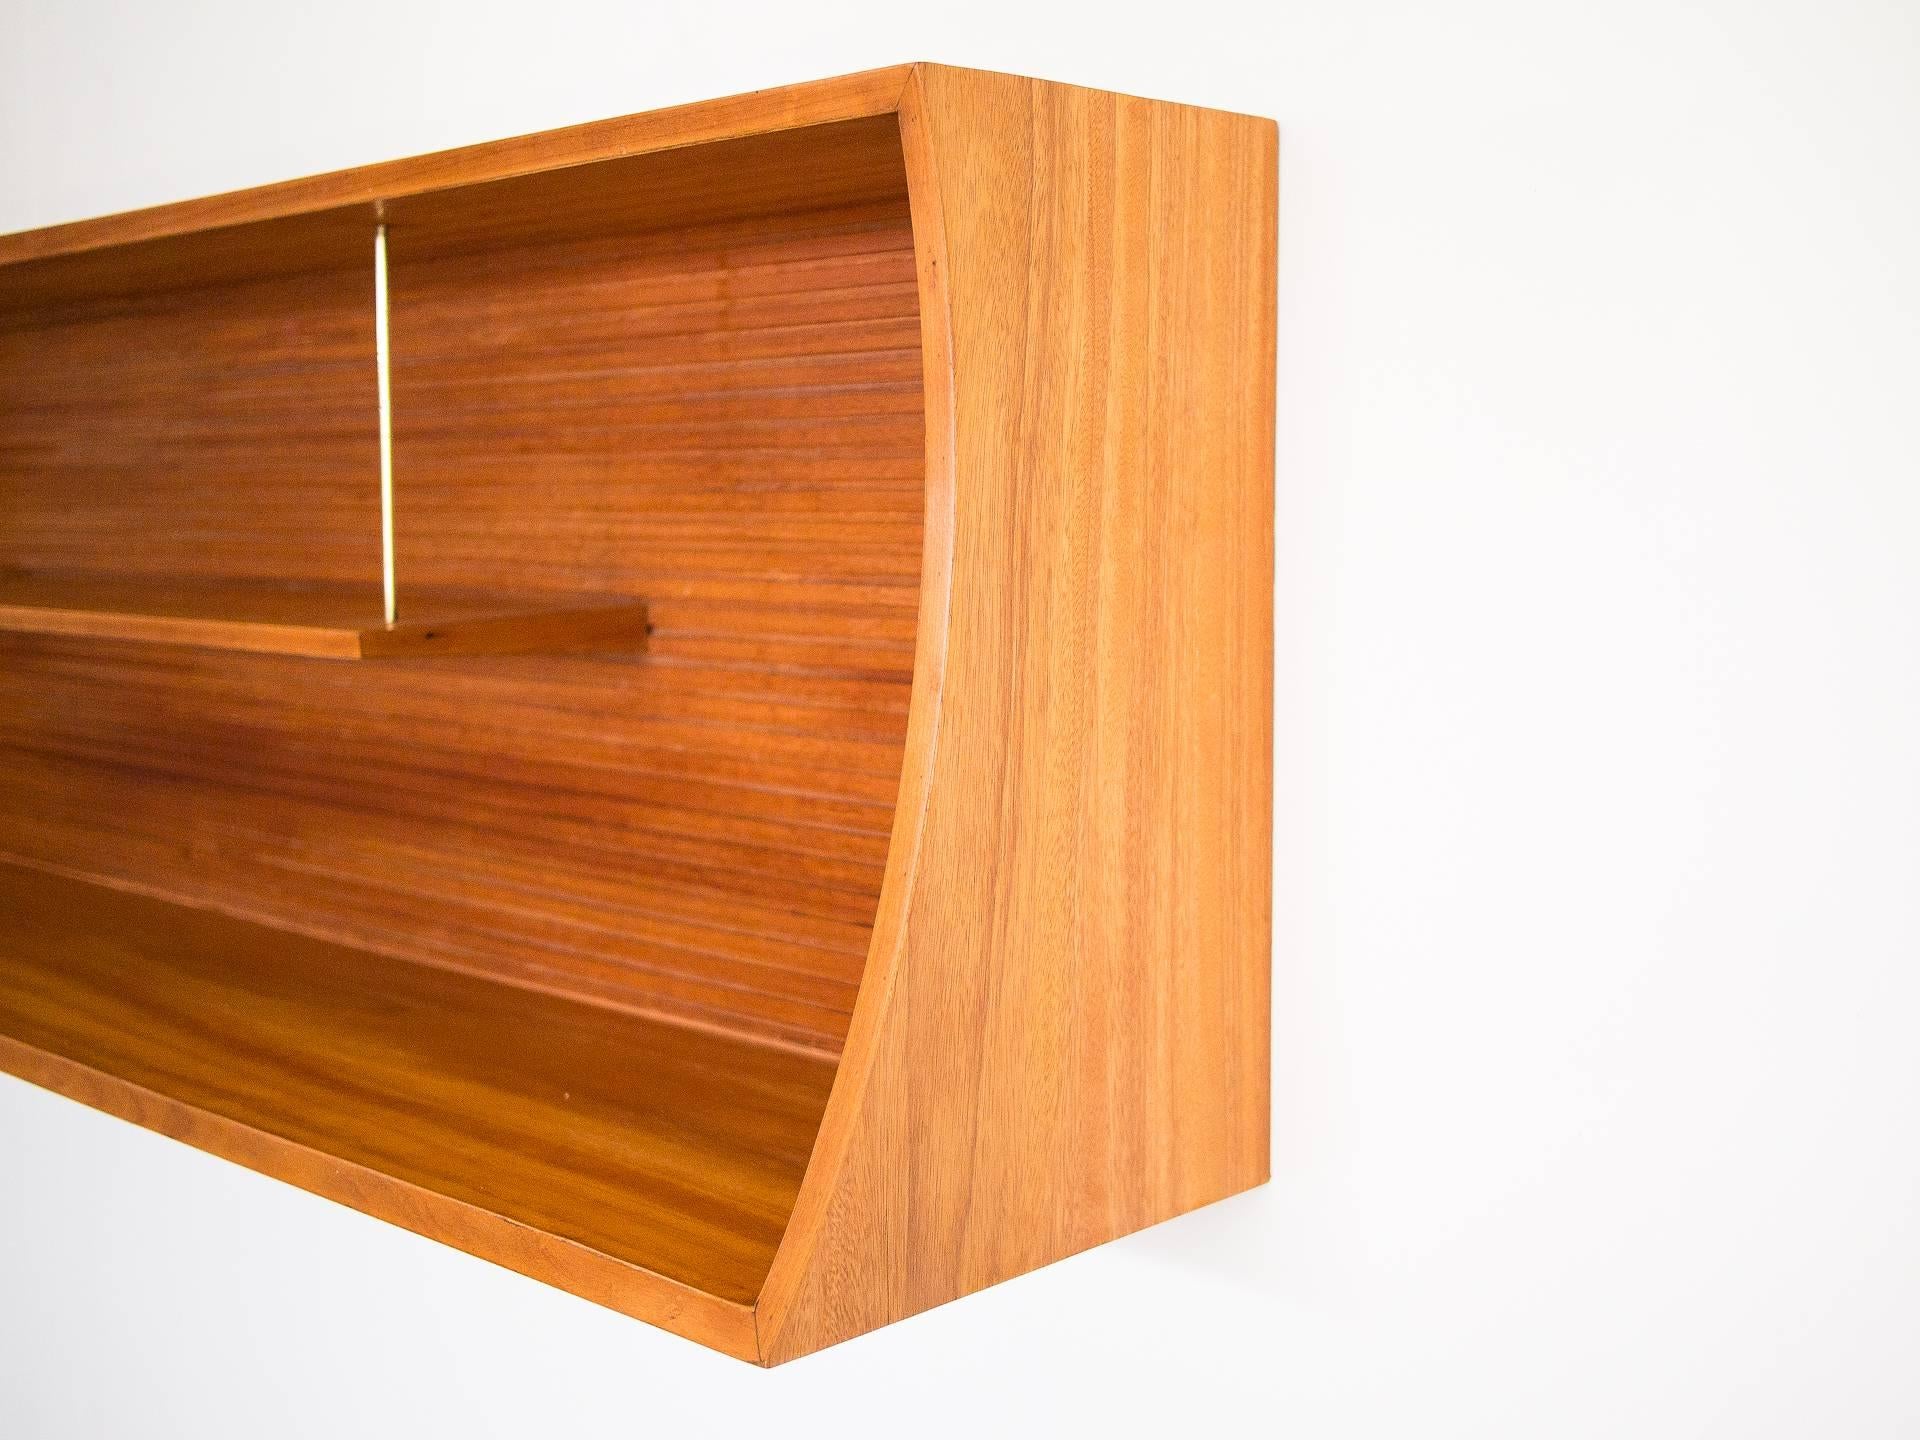 This beautiful shelving unit is reminiscent of the works of Joaquim Tenreiro and his made to order pieces. Borsoi was friends with Tenreiro and probably was heavily influenced by his work when creating the pieces for this house. 

Slatted back and